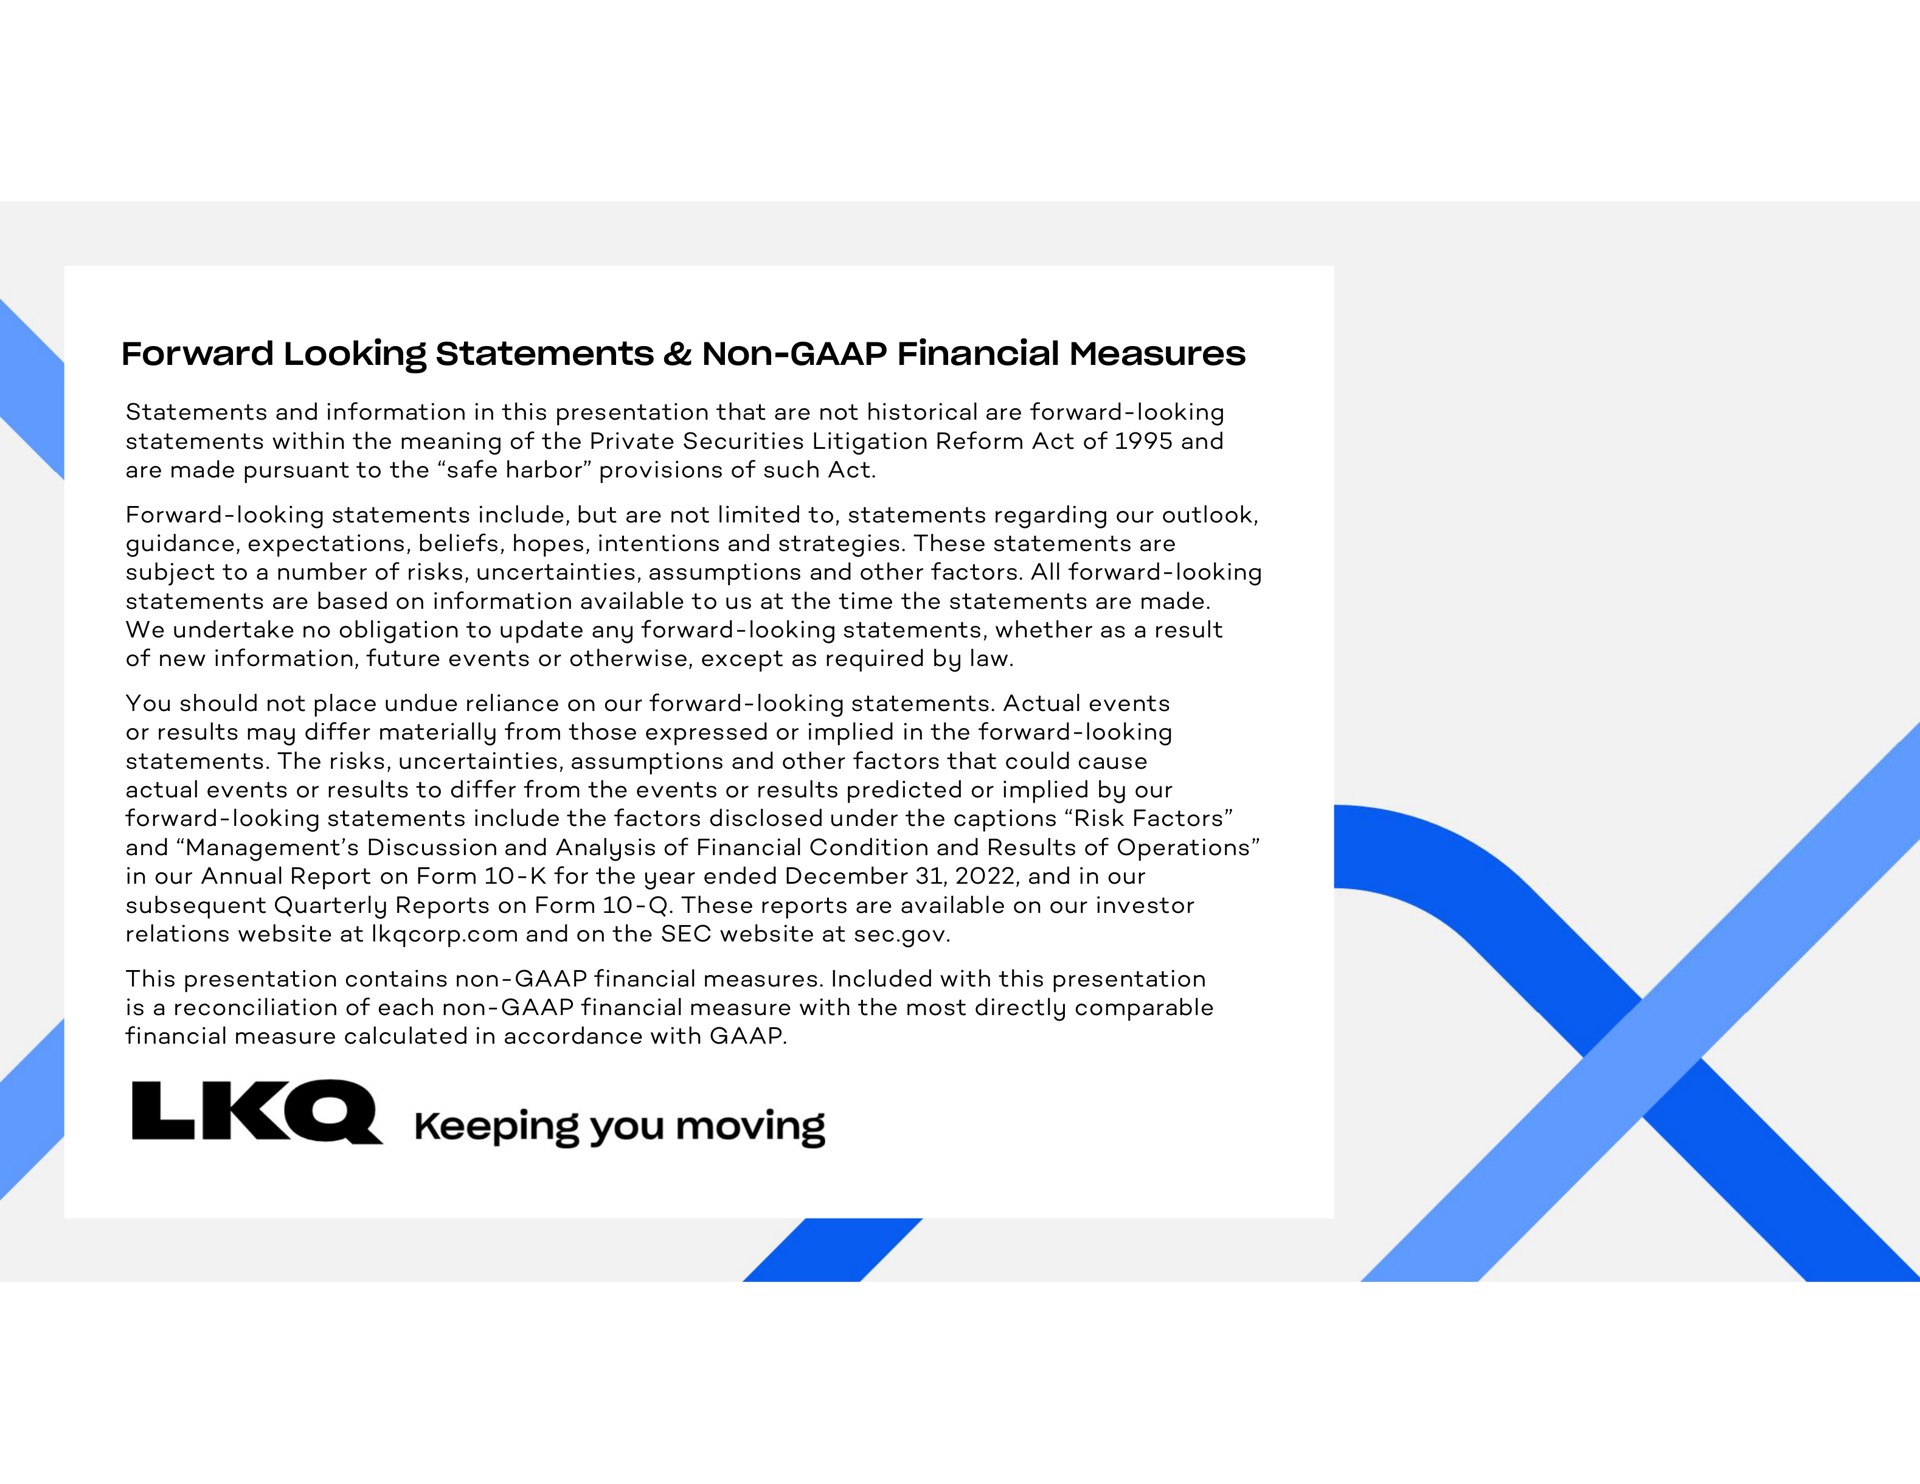 forward looking statements non financial measures keeping you moving | LKQ